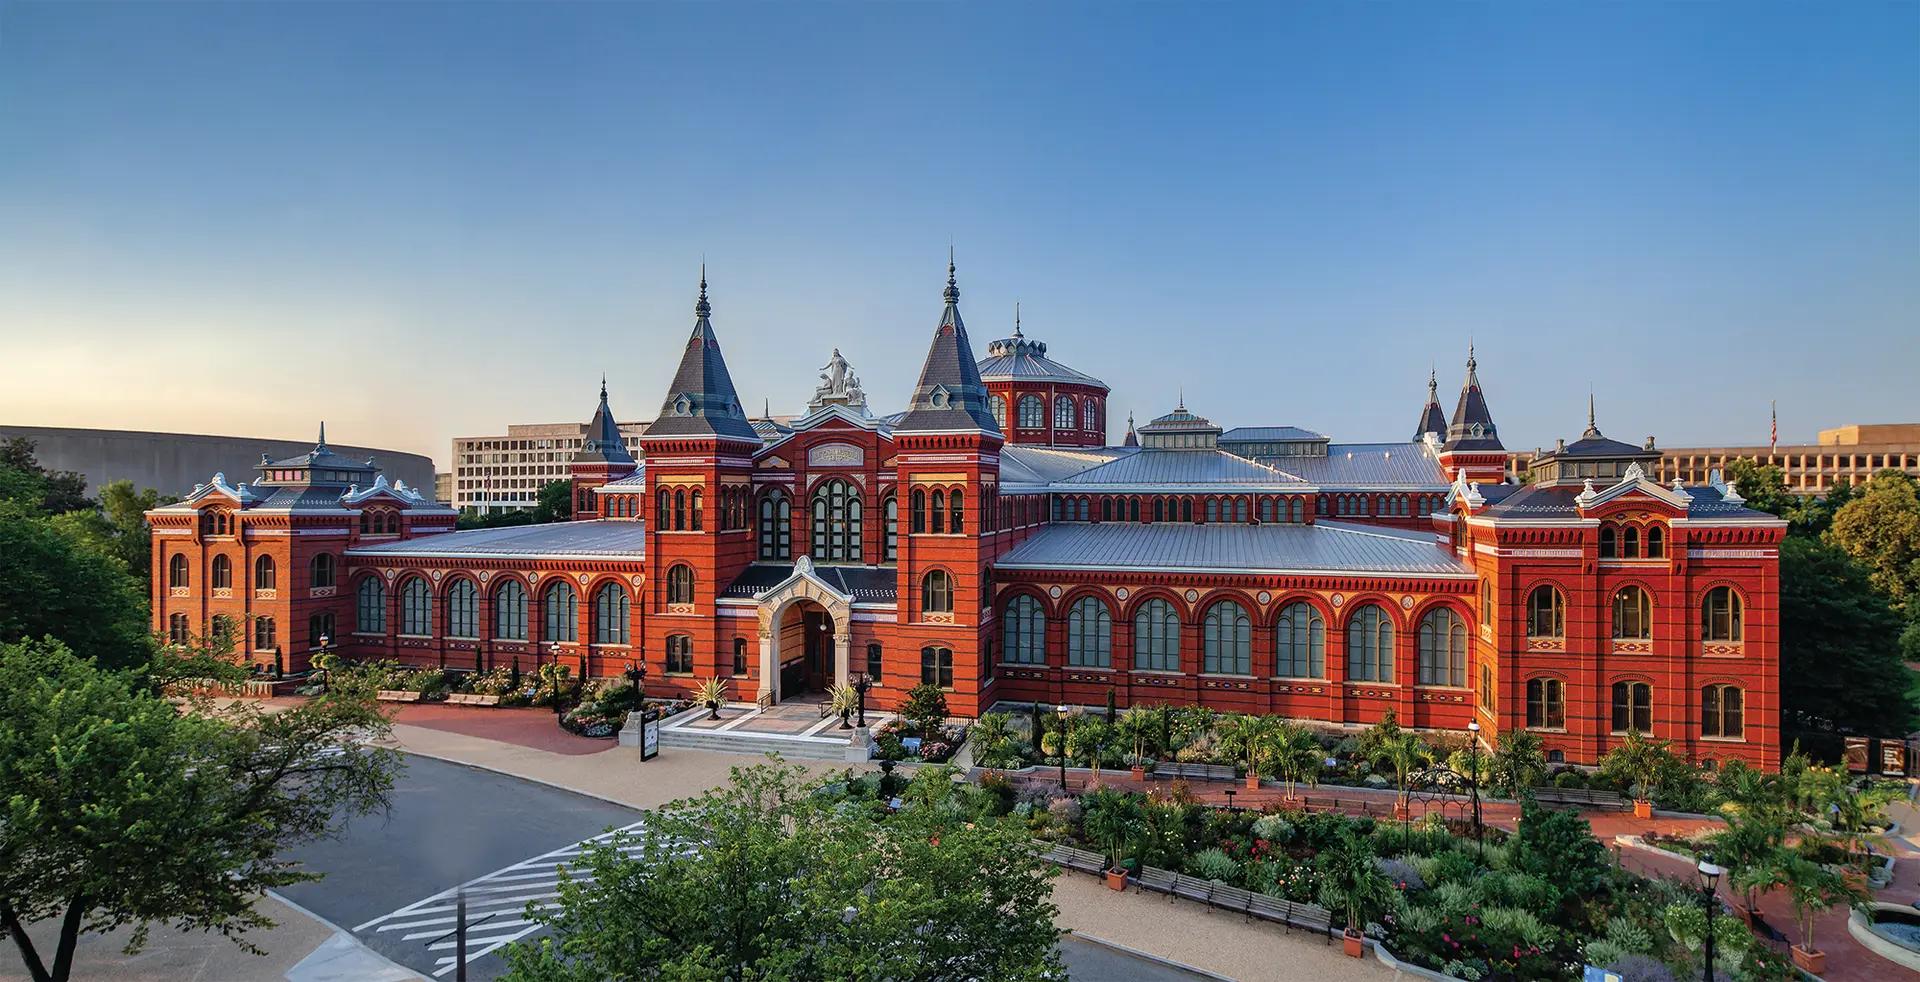 The Smithsonian's Arts and Industries Building has been selected as a potential site for a Latino or women's history museum. © Ron Blunt Architectural Photography.